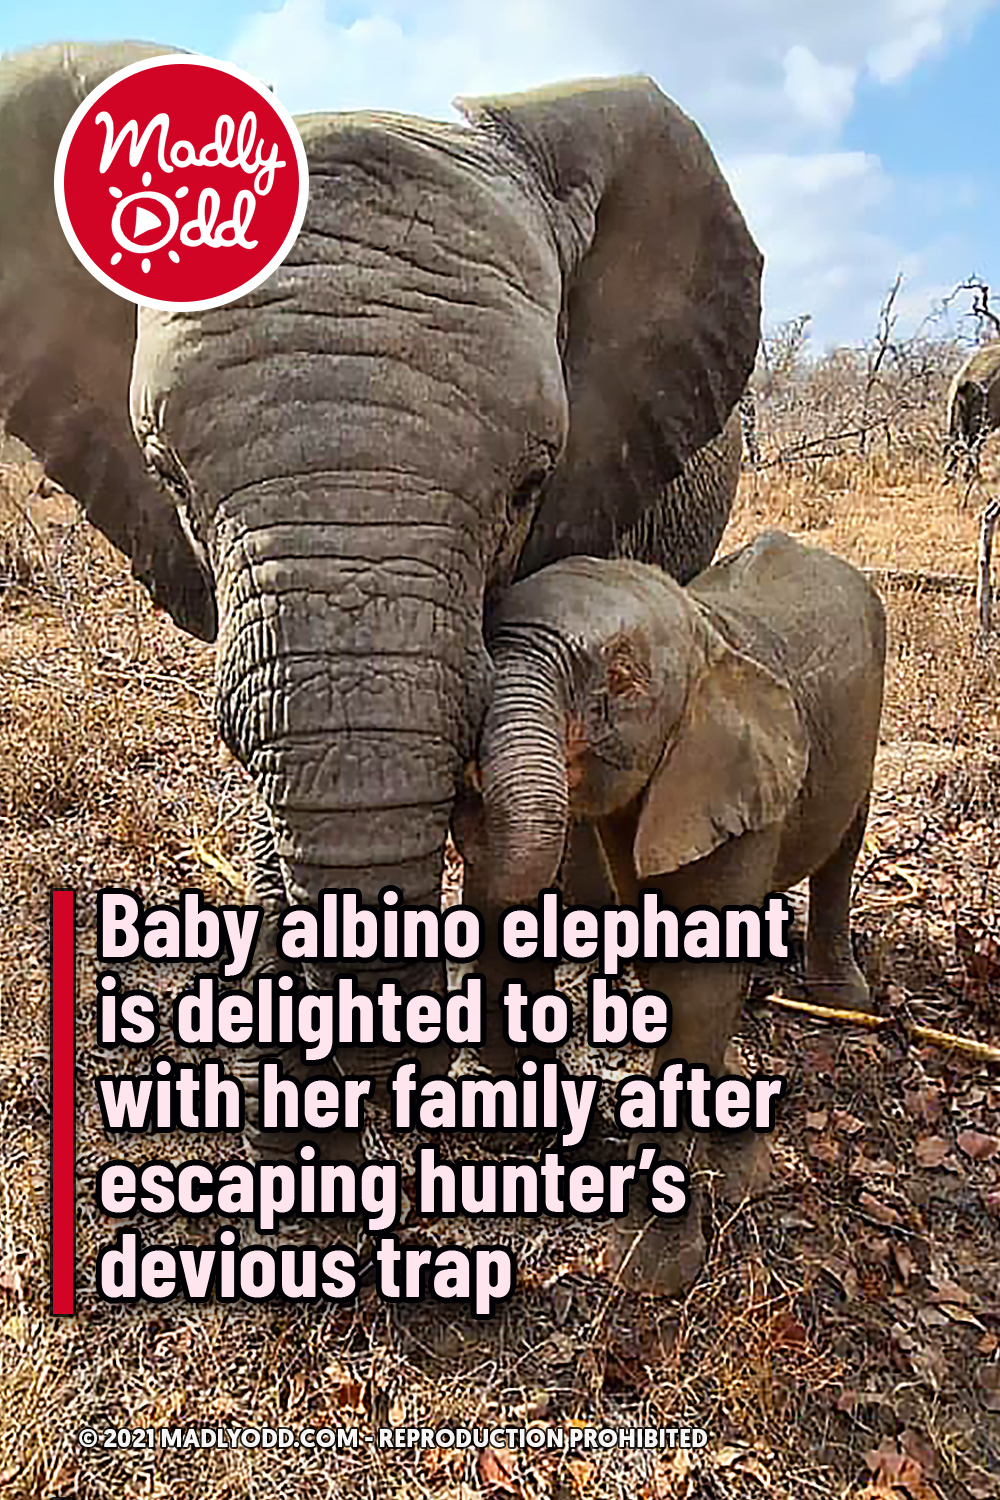 Baby albino elephant is delighted to be with her family after escaping hunter’s devious trap